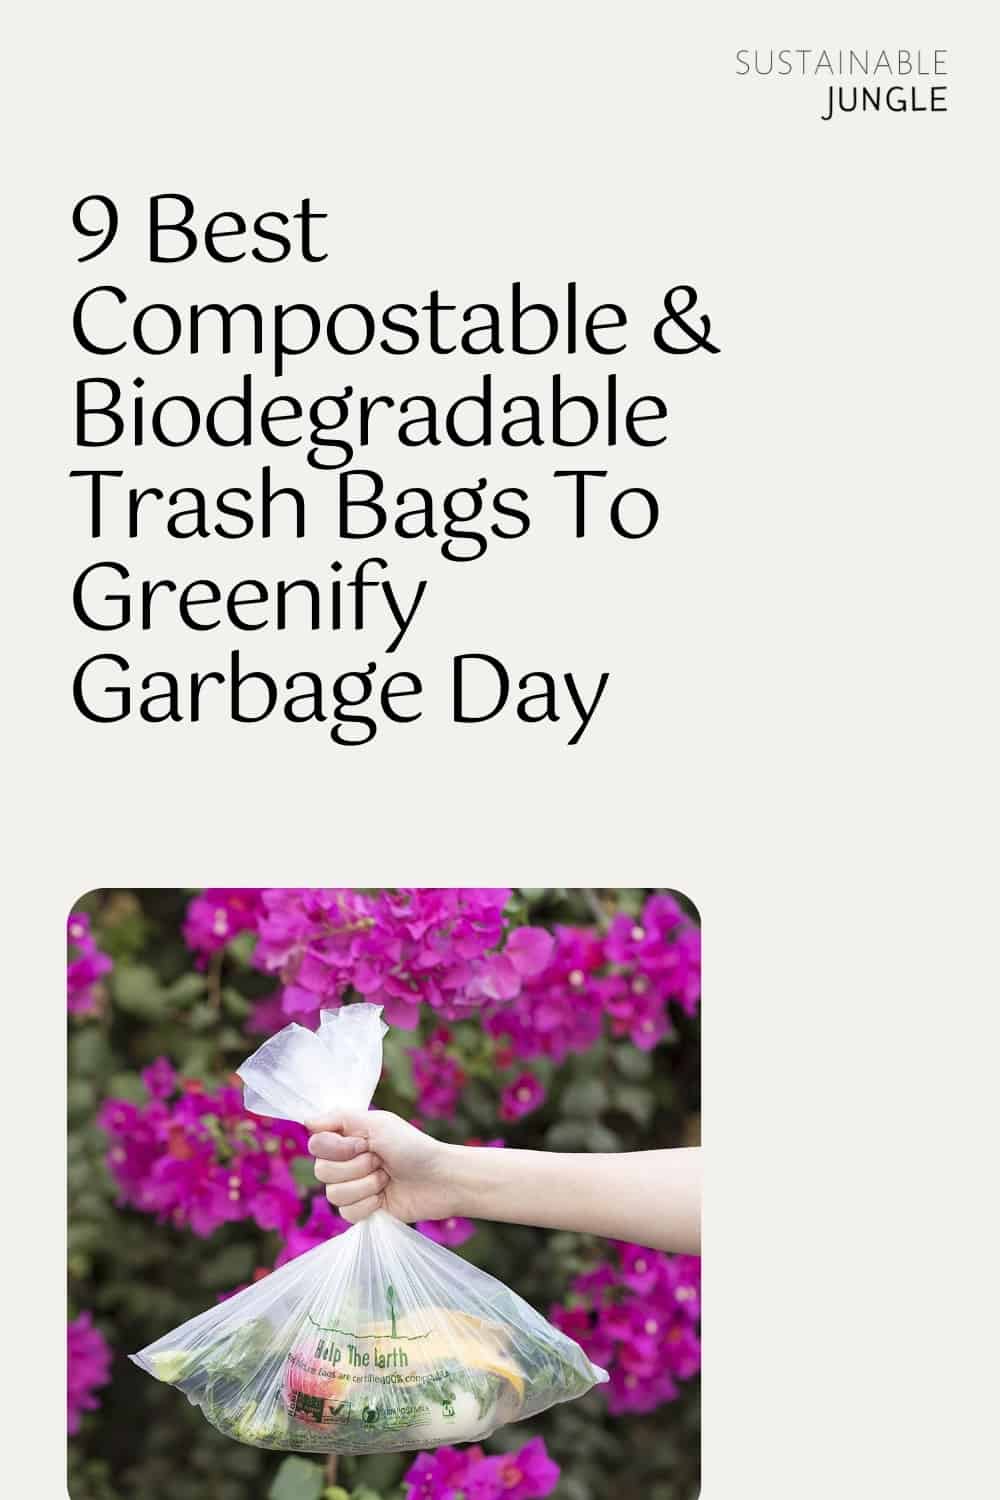 9 Best Compostable & Biodegradable Trash Bags To Greenify Garbage Day #biodegradabletrashbags #biodegradablegarbagebags #compotabletrashbags #compostablegarbagebags #bestbiodegradabletrashbags #bestcompostabletrashbags #sustainablejungle Image by Second Nature